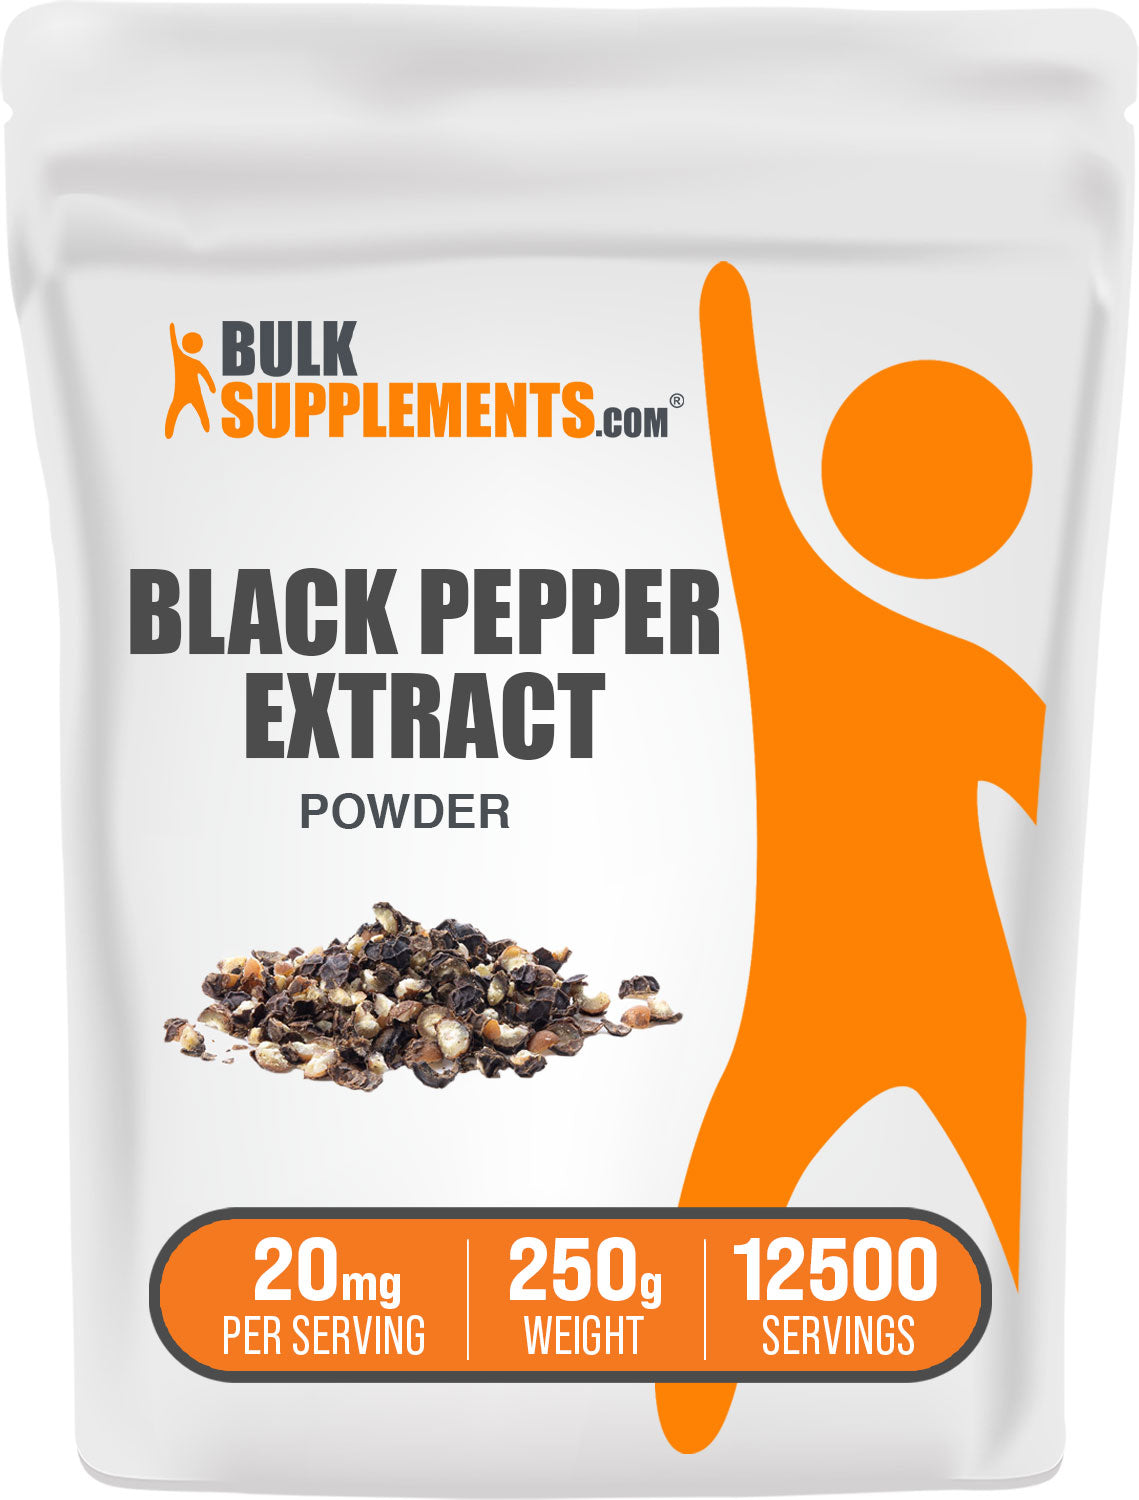 250g bag of black pepper extract